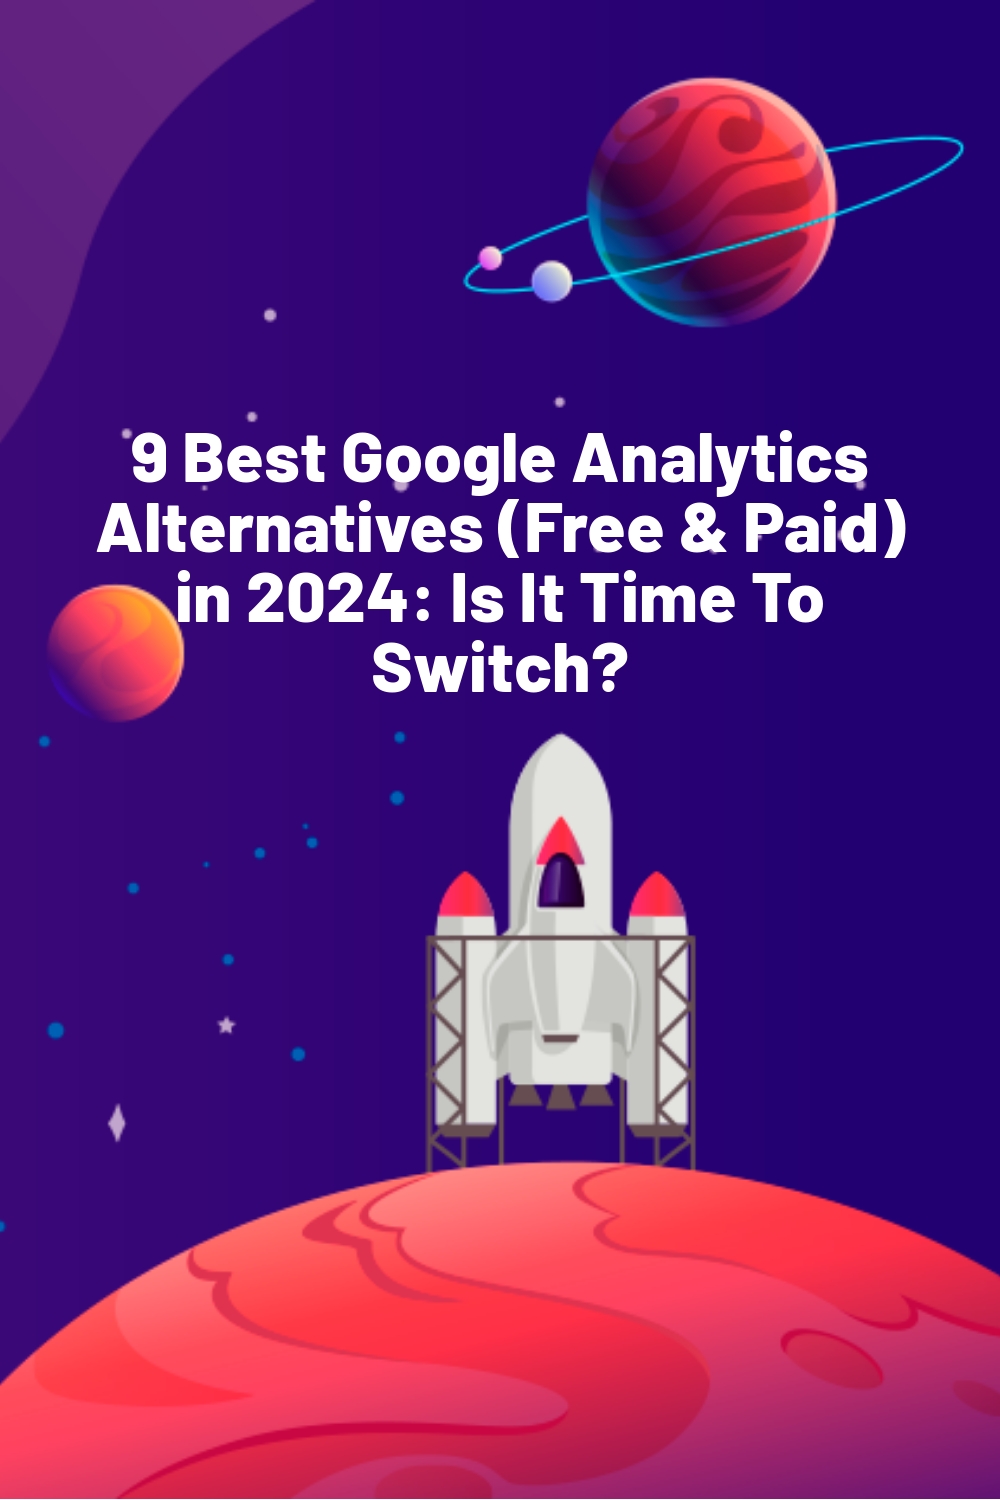 9 Best Google Analytics Alternatives (Free & Paid) in 2024: Is It Time To Switch?